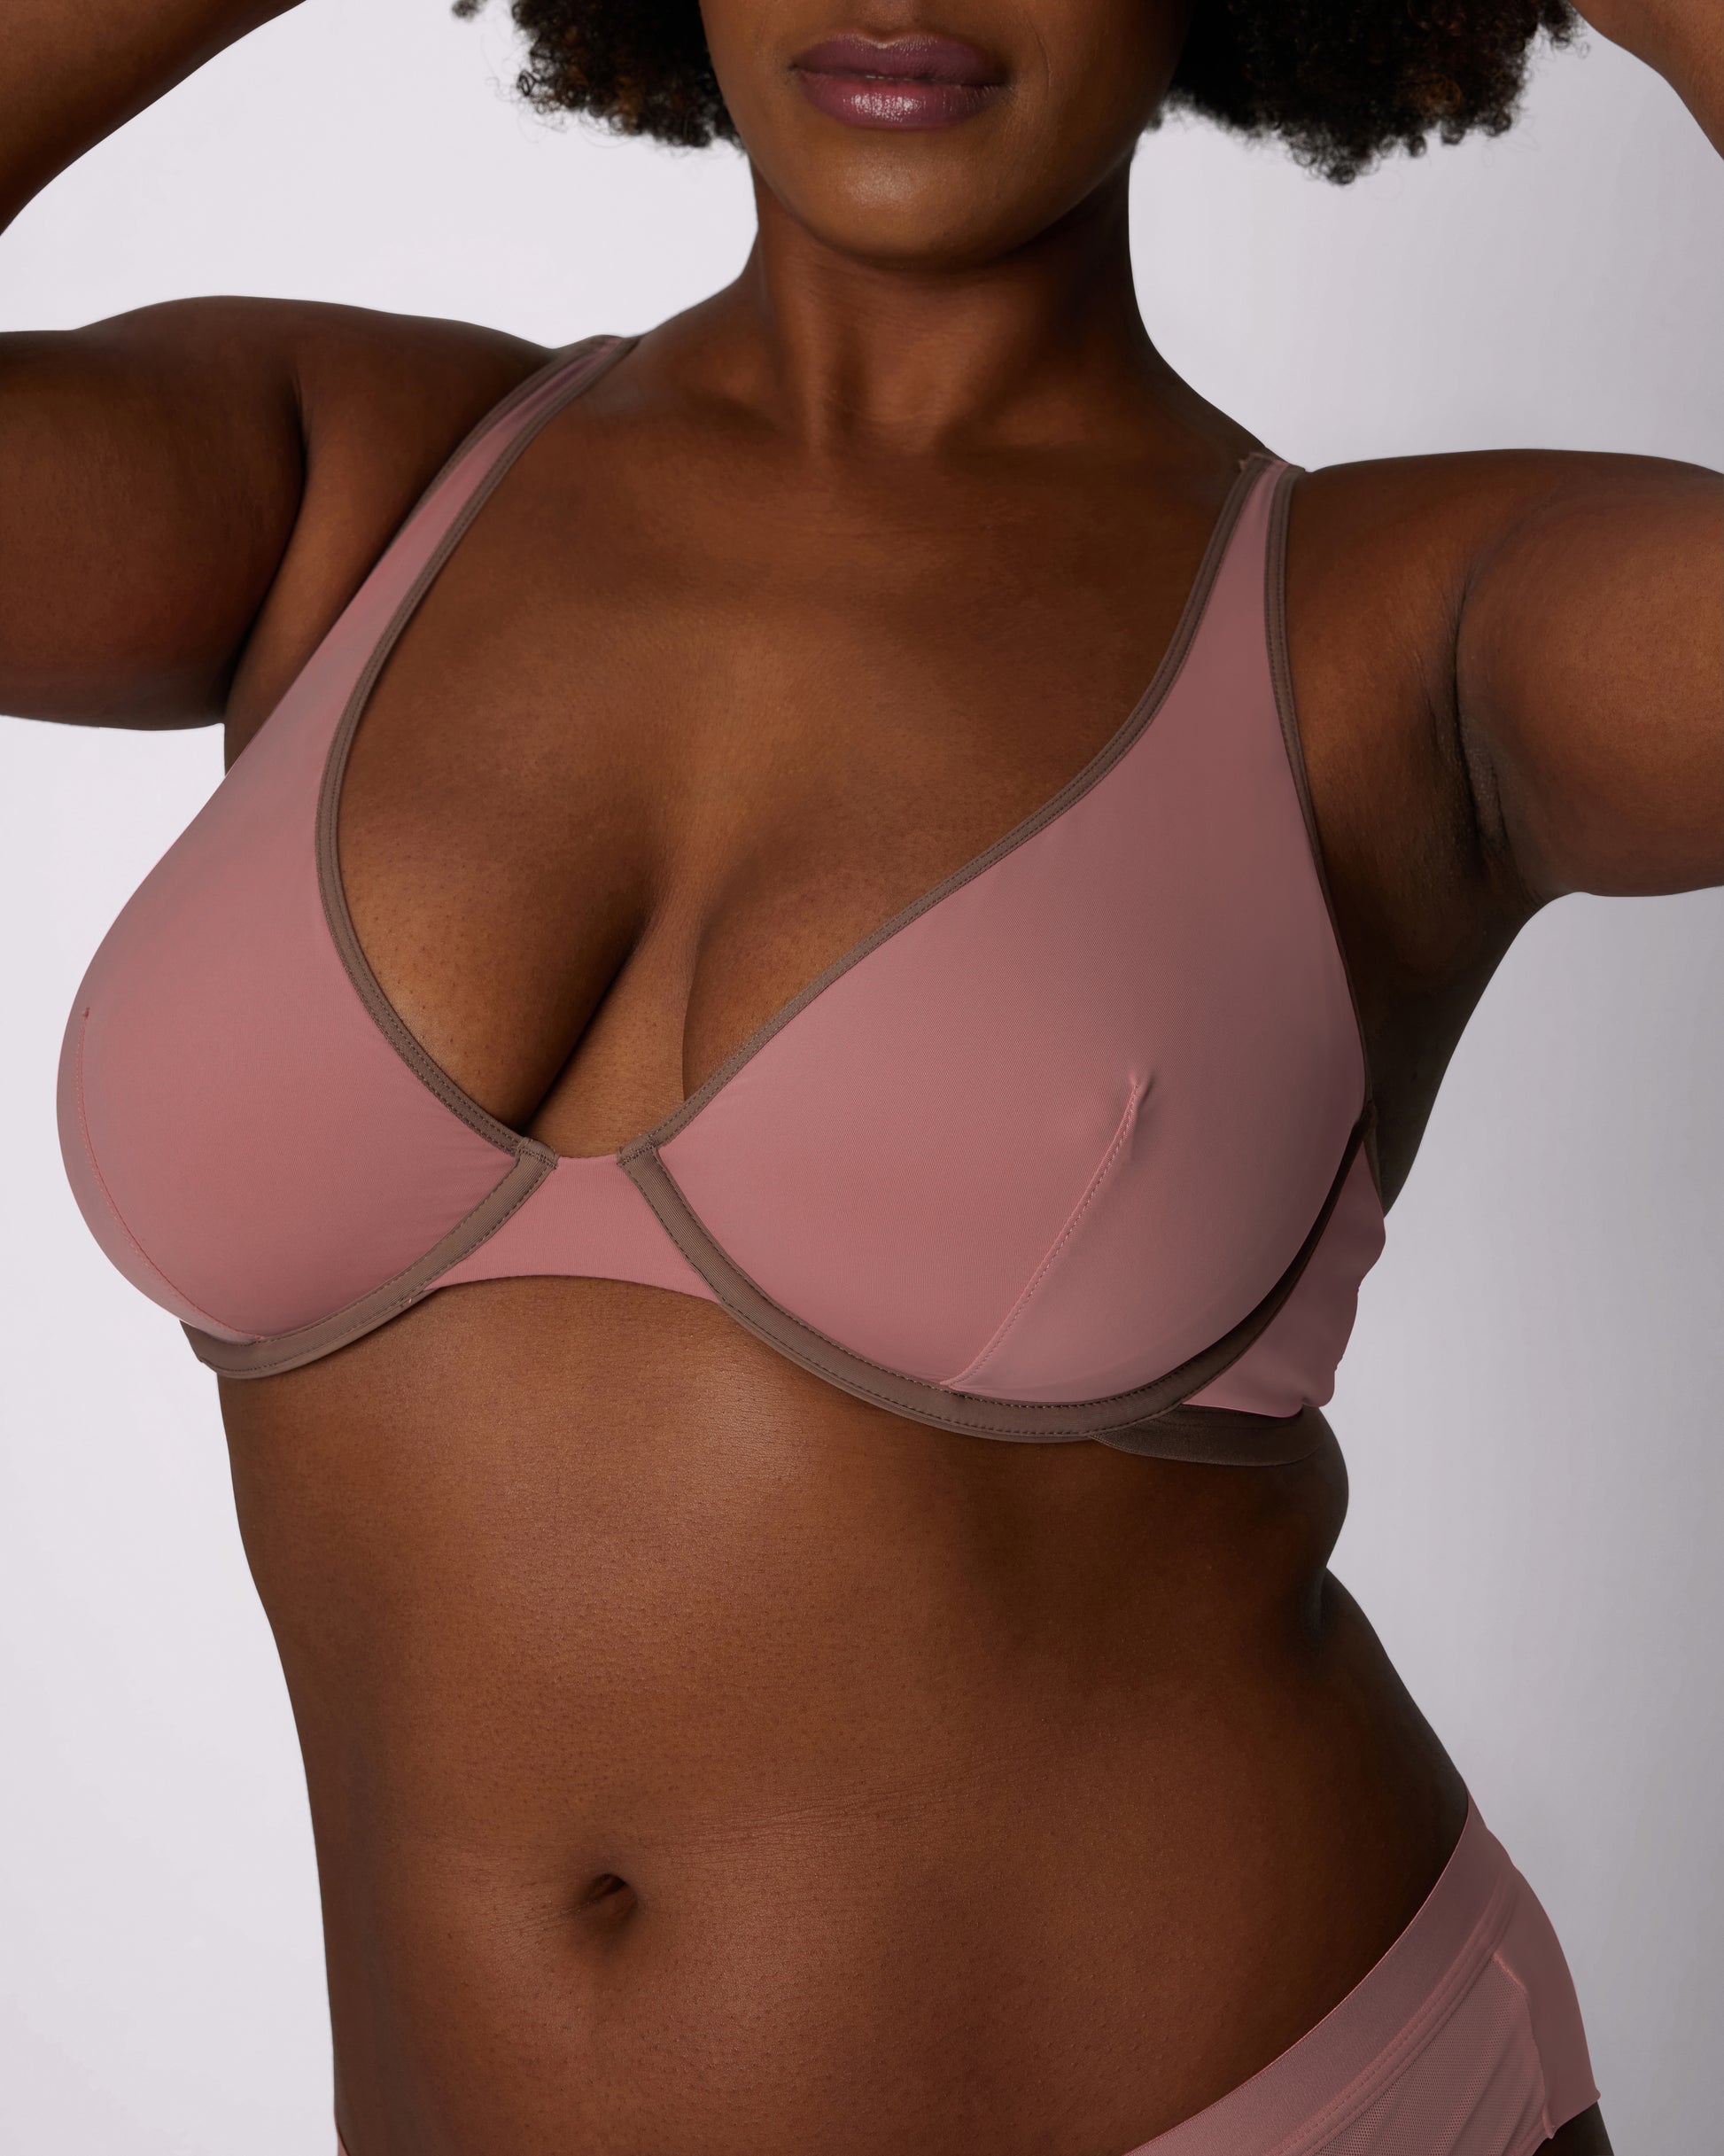 Torrid - Meet our Dream Wire-Free Plunge bra! We took our